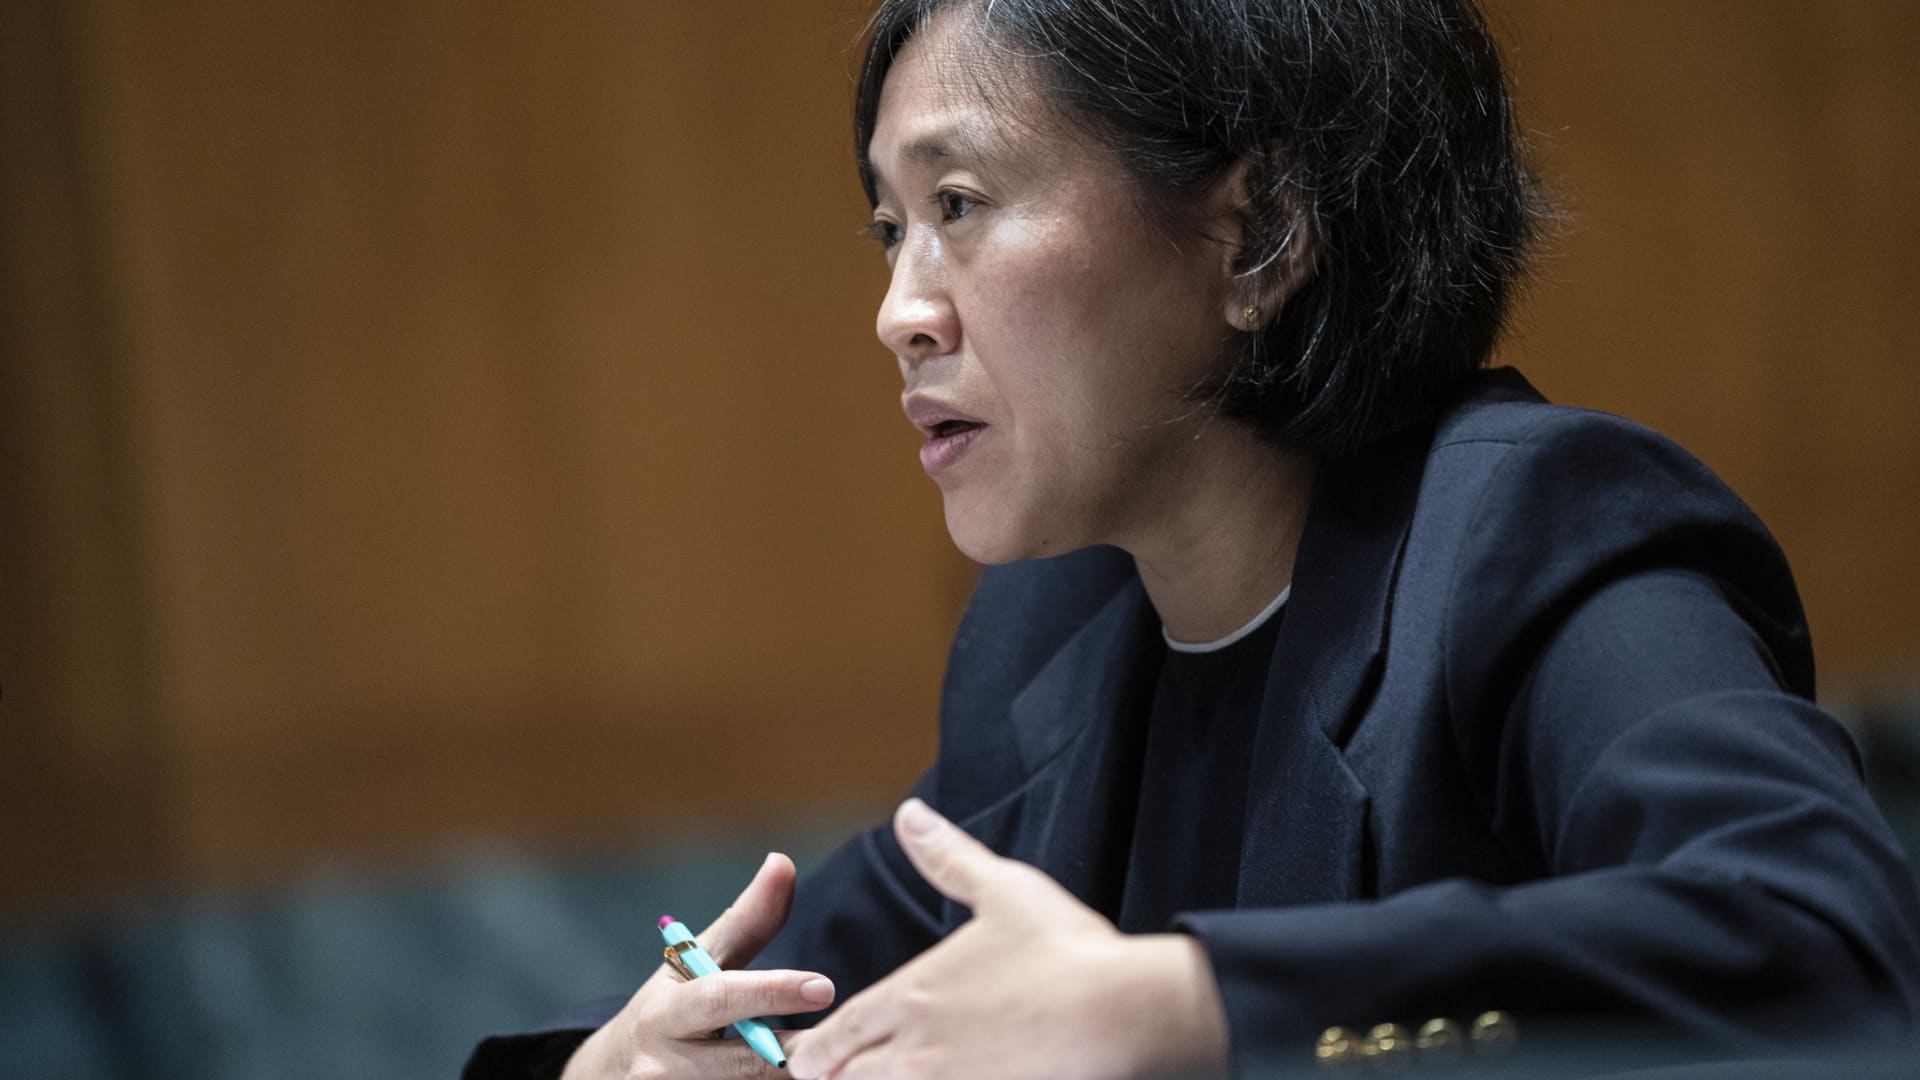 U.S. Trade Representative Katherine Tai testifies before the Senate Appropriations Subcommittee on Commerce, Justice, Science, and Related Agencies during a hearing on the proposed budget for fiscal year 2022 for the Office of the U.S. Trade Representative on Capitol Hill on April 28, 2021 in Washington, DC.